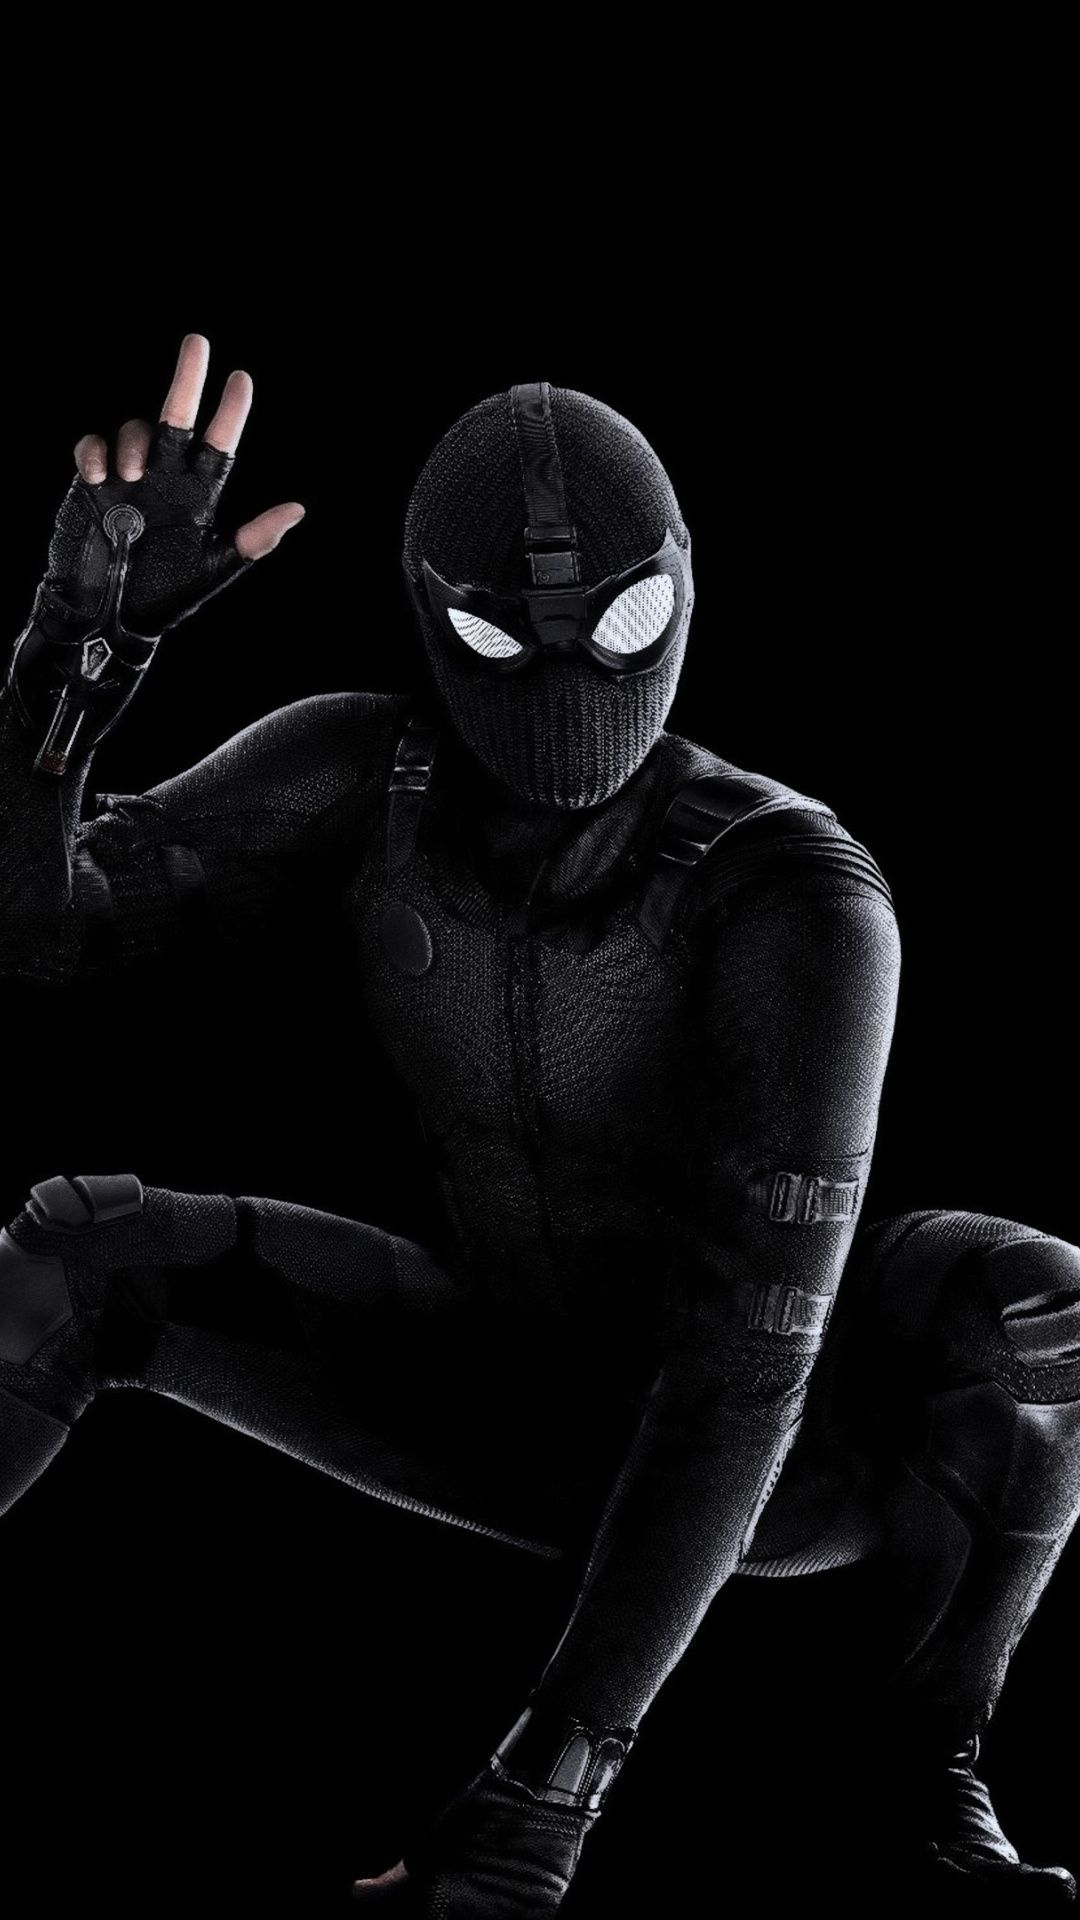 Spider Man: Far From Home, Black Suit Wallpaper. Marvel Superheroes, Marvel Spiderman, Spiderman